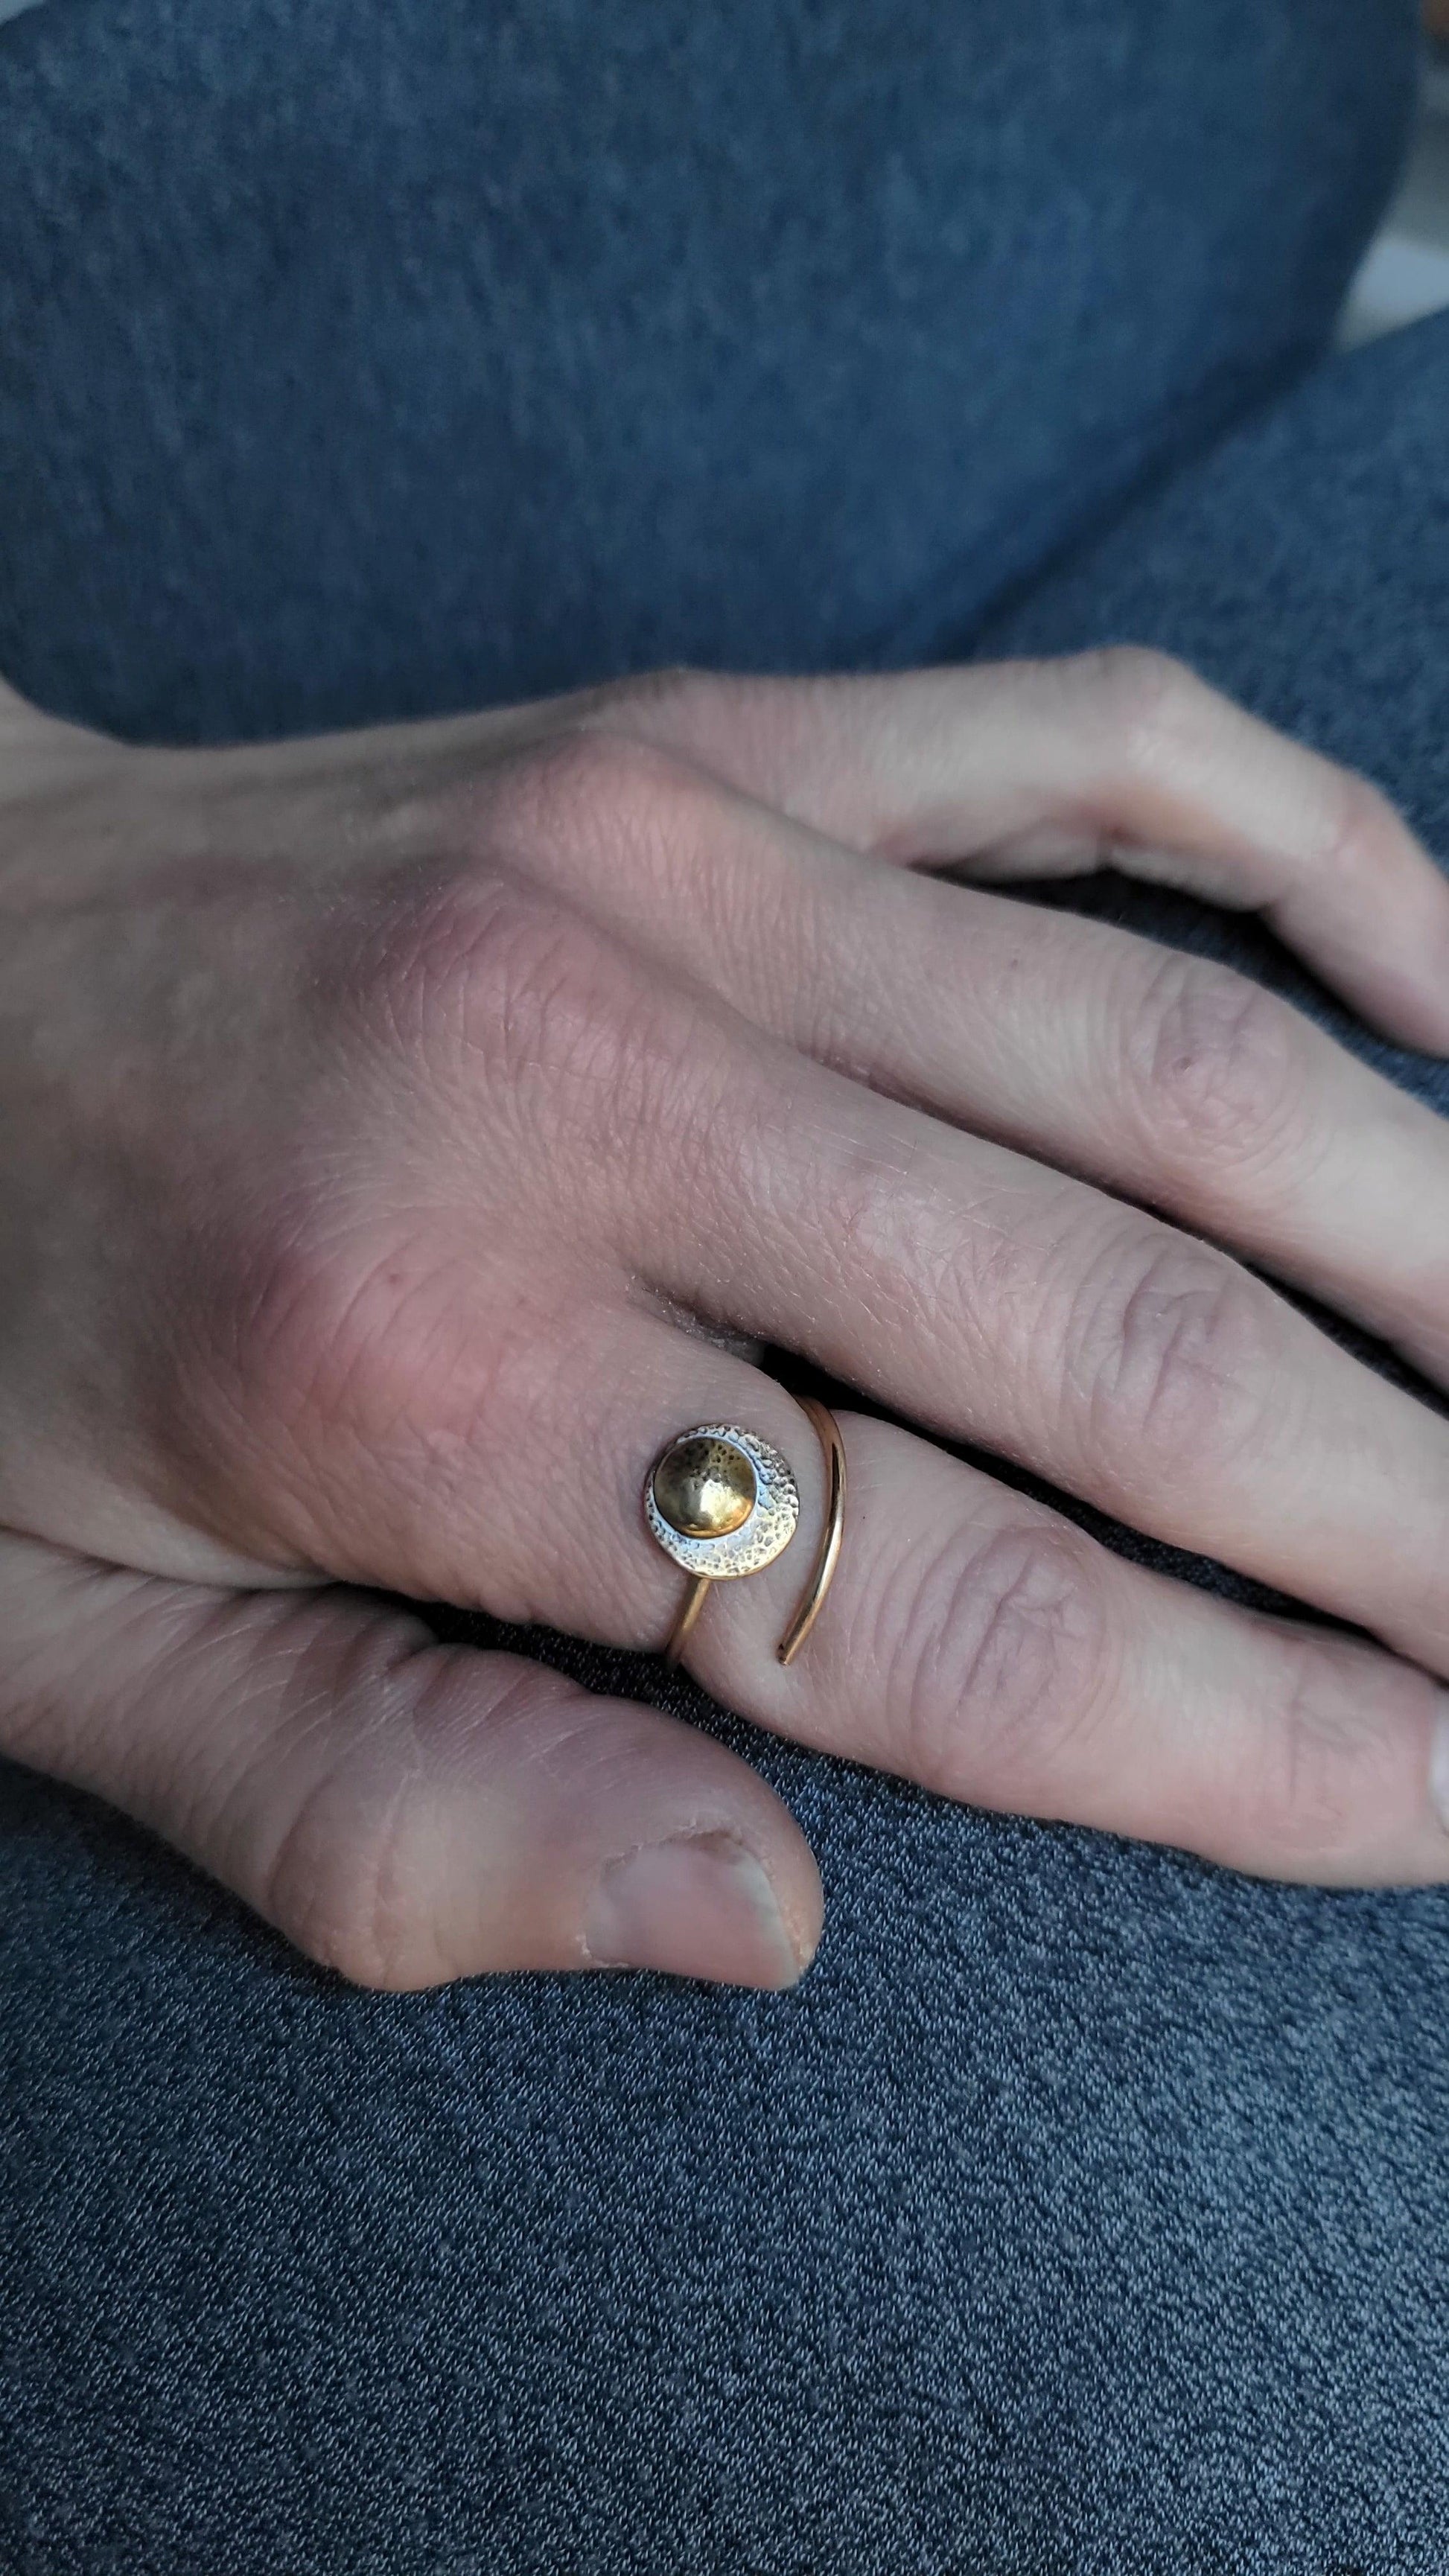 Adjustable 14K Gold Moon Ring for strength modeled on a woman's hand.